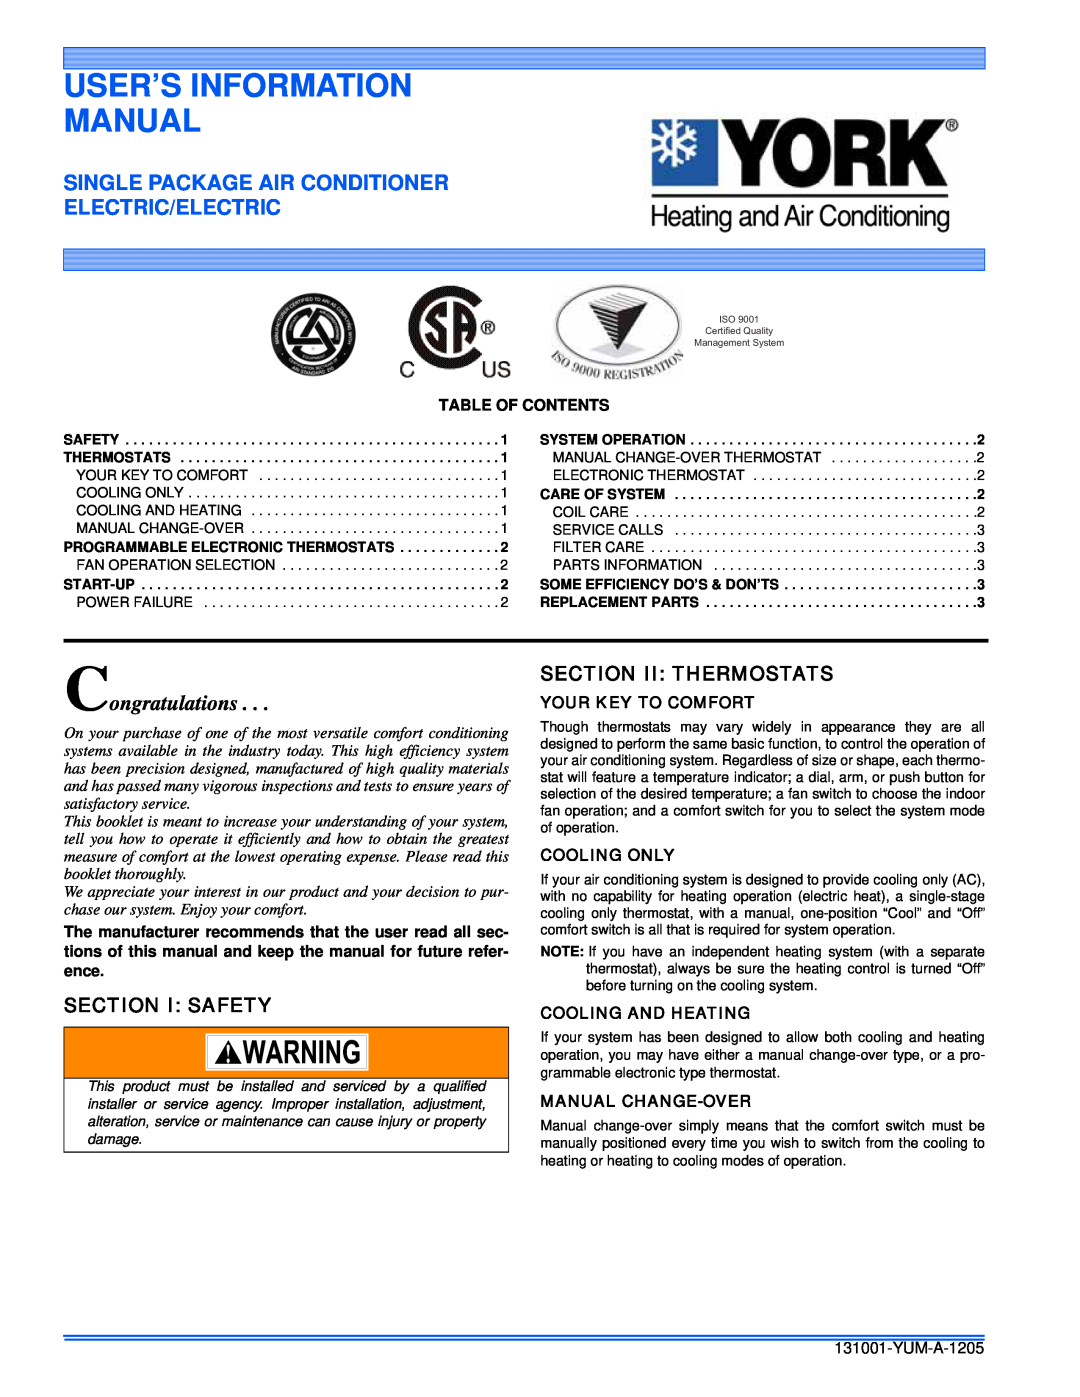 York 131001-YUM-A-1205 manual Section I Safety, Section Ii Thermostats, Table Of Contents, Your Key To Comfort 